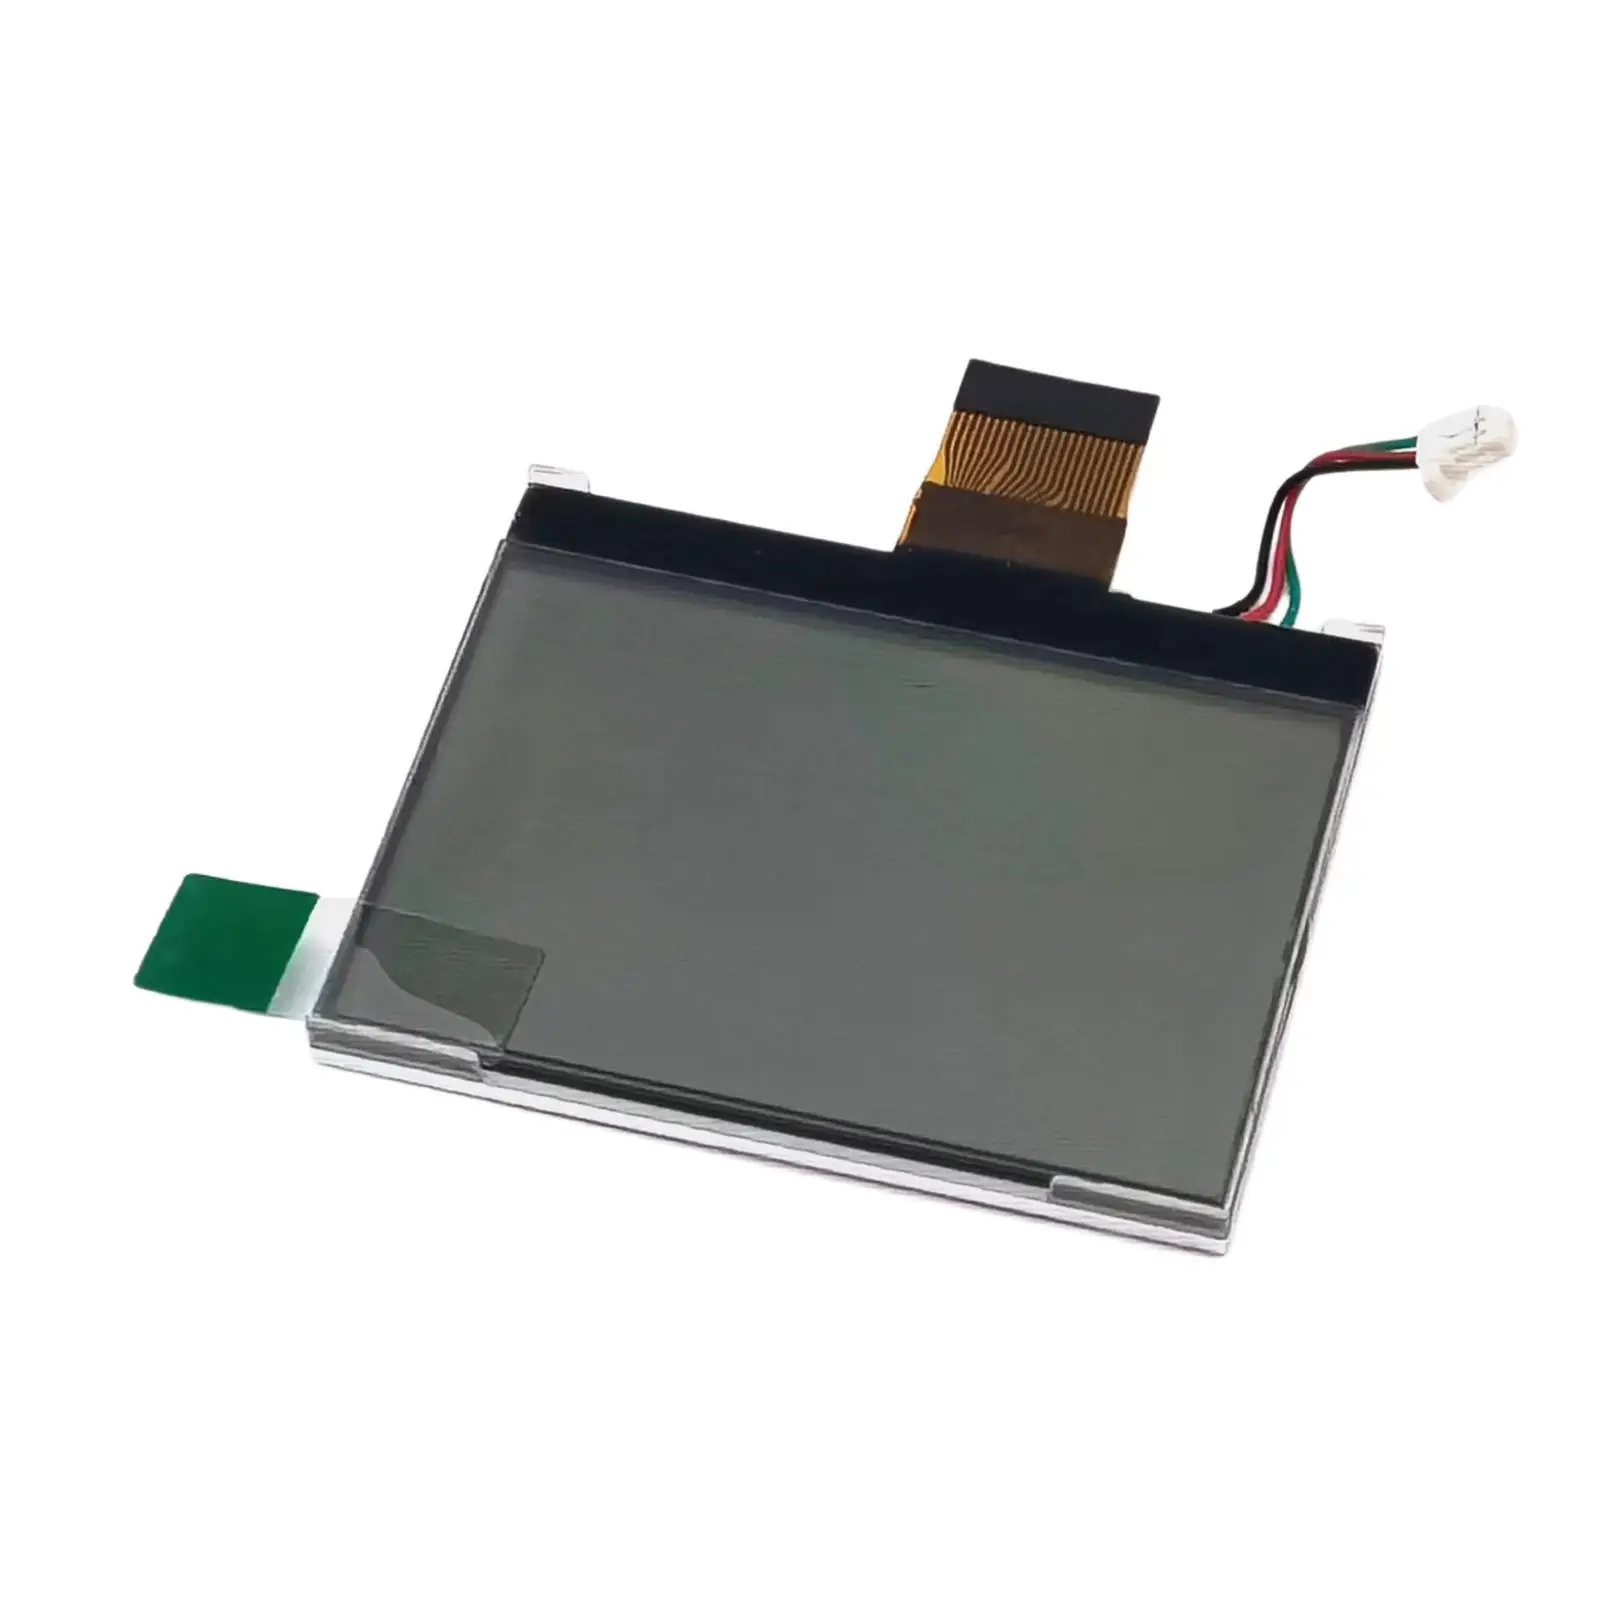 LCD Display Screen High Performance Replacement Parts Professional for V860 TT685 AD360II V860II Components